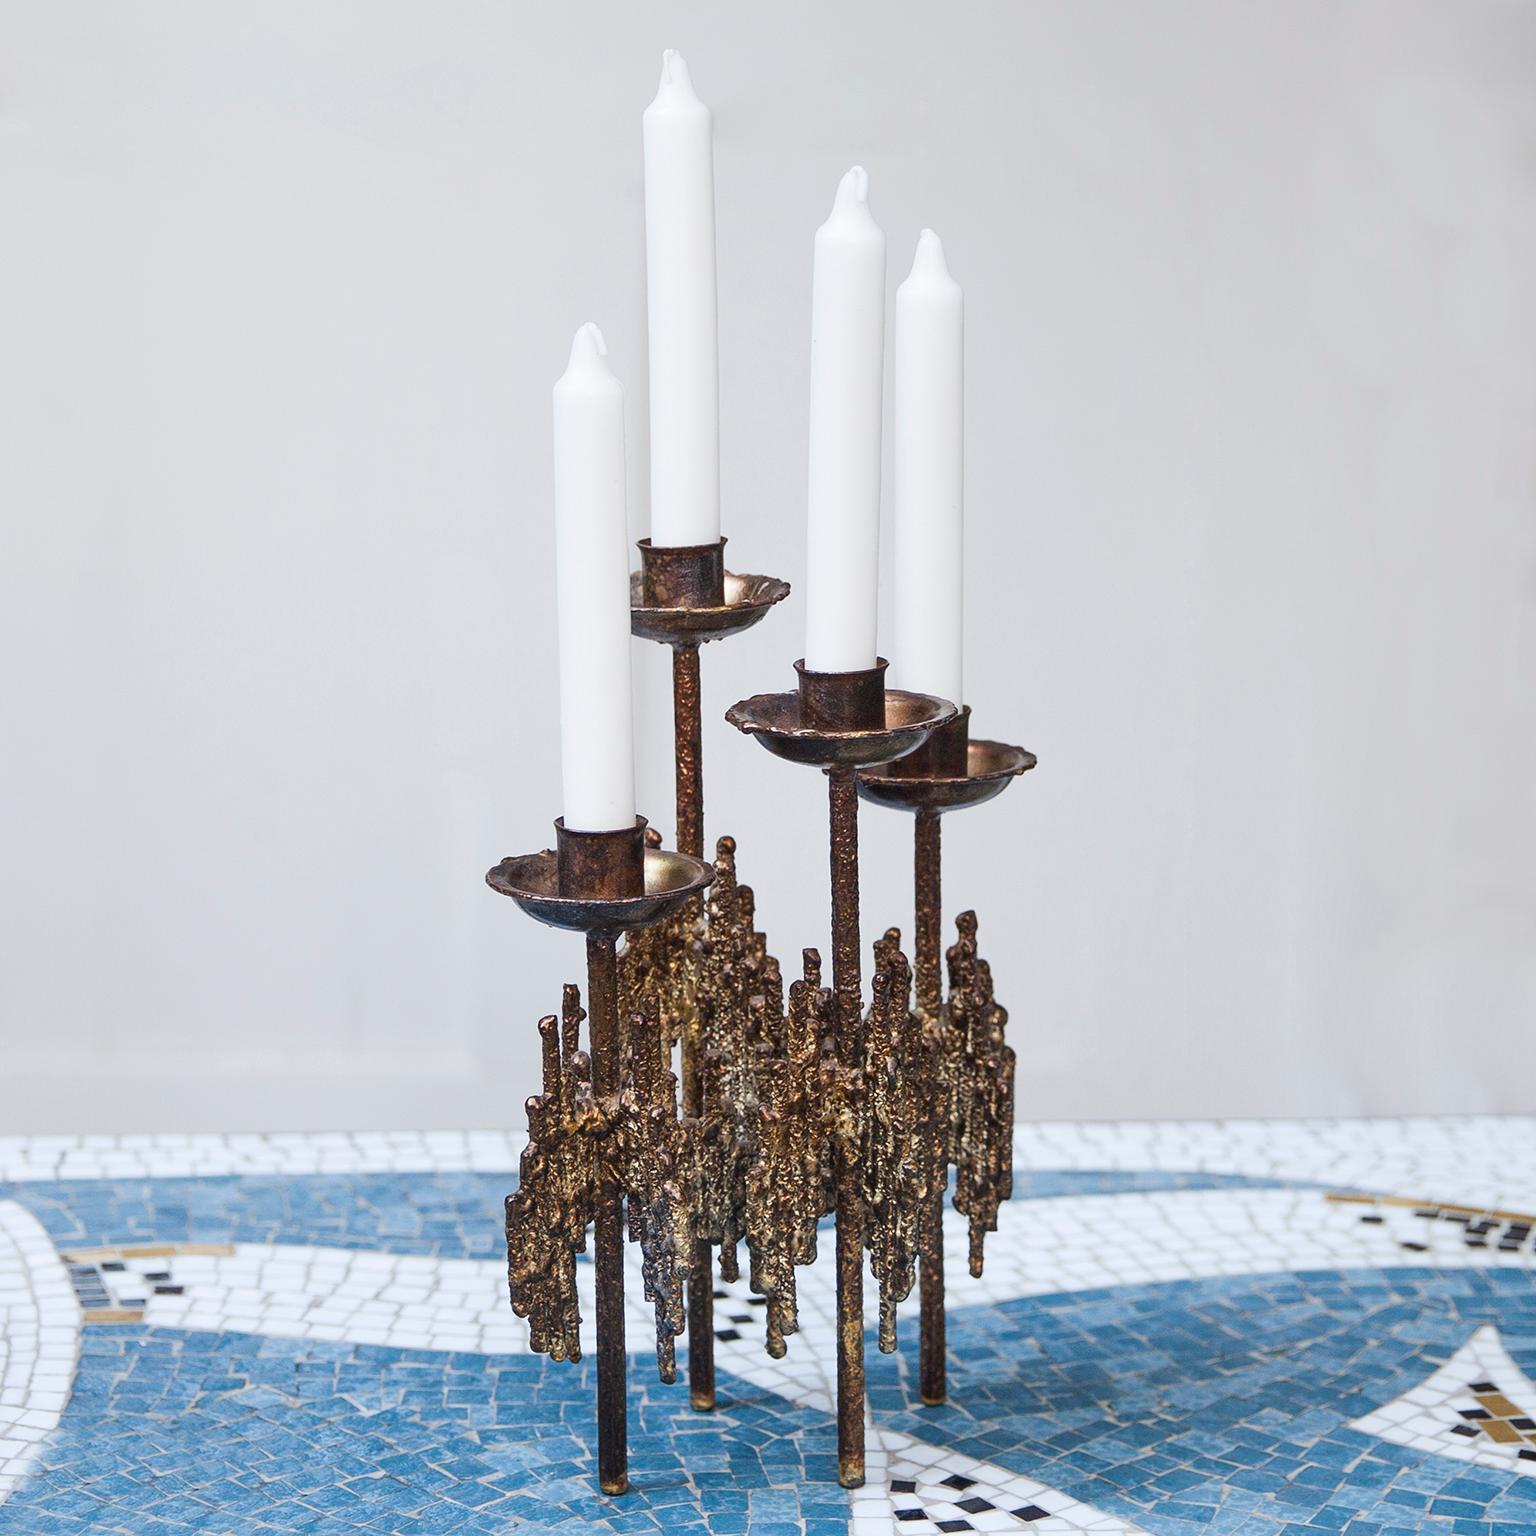 French candleholder in solid gilded metal for four candles, which will be a famous piece in your home.
Measures: 16 D x 20 W x 29 H cm.